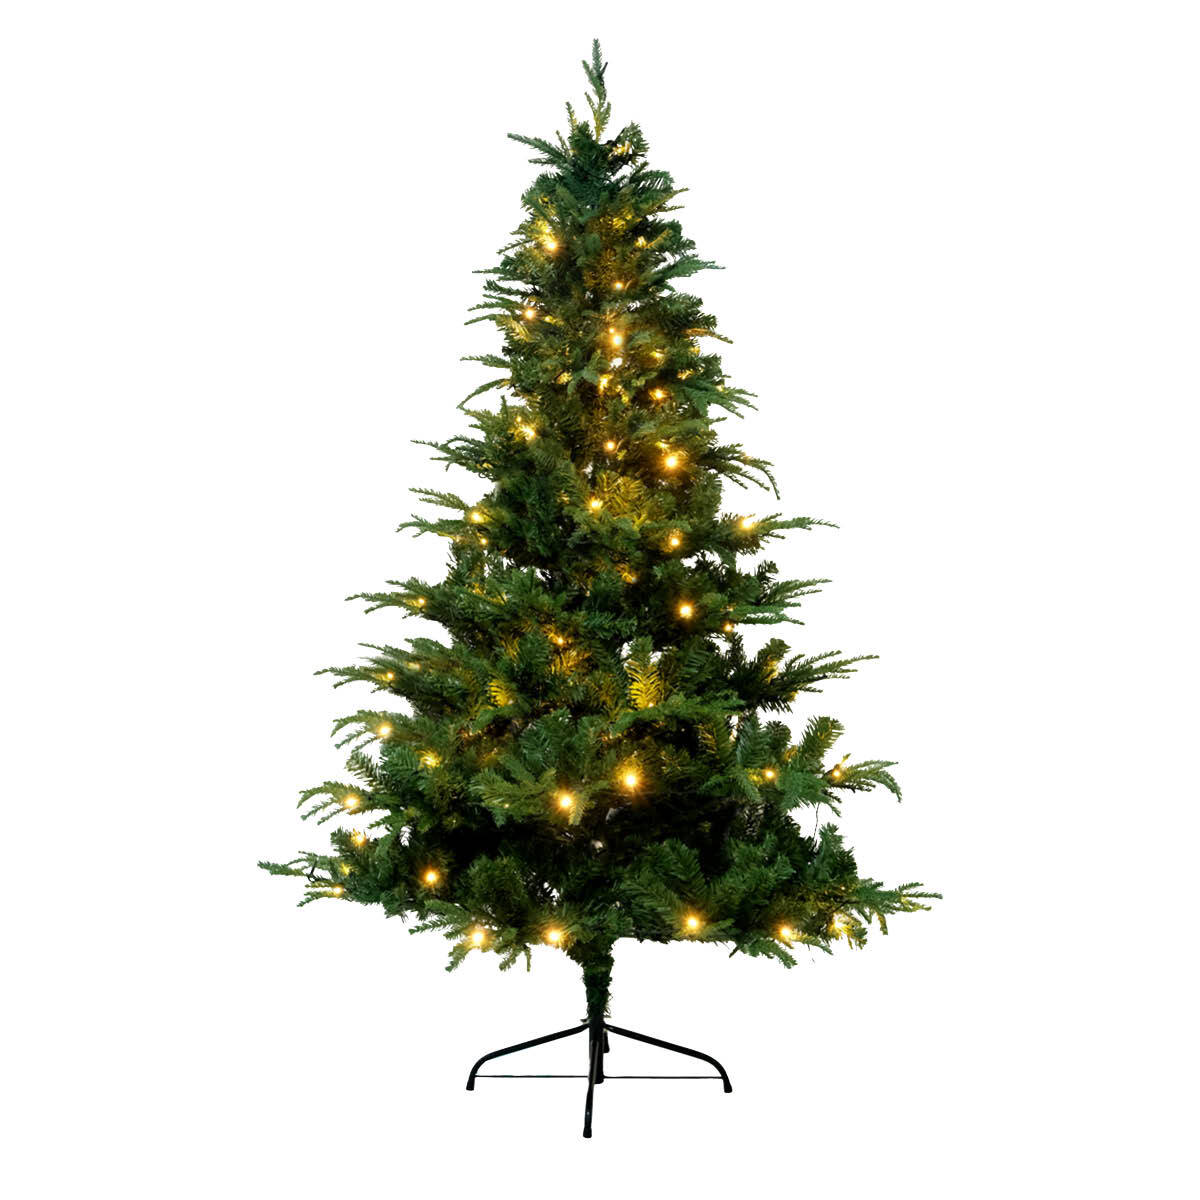 Christmas By Sas 1.8m Pine Tree 300 Warm White LED Lights With 8 Functions